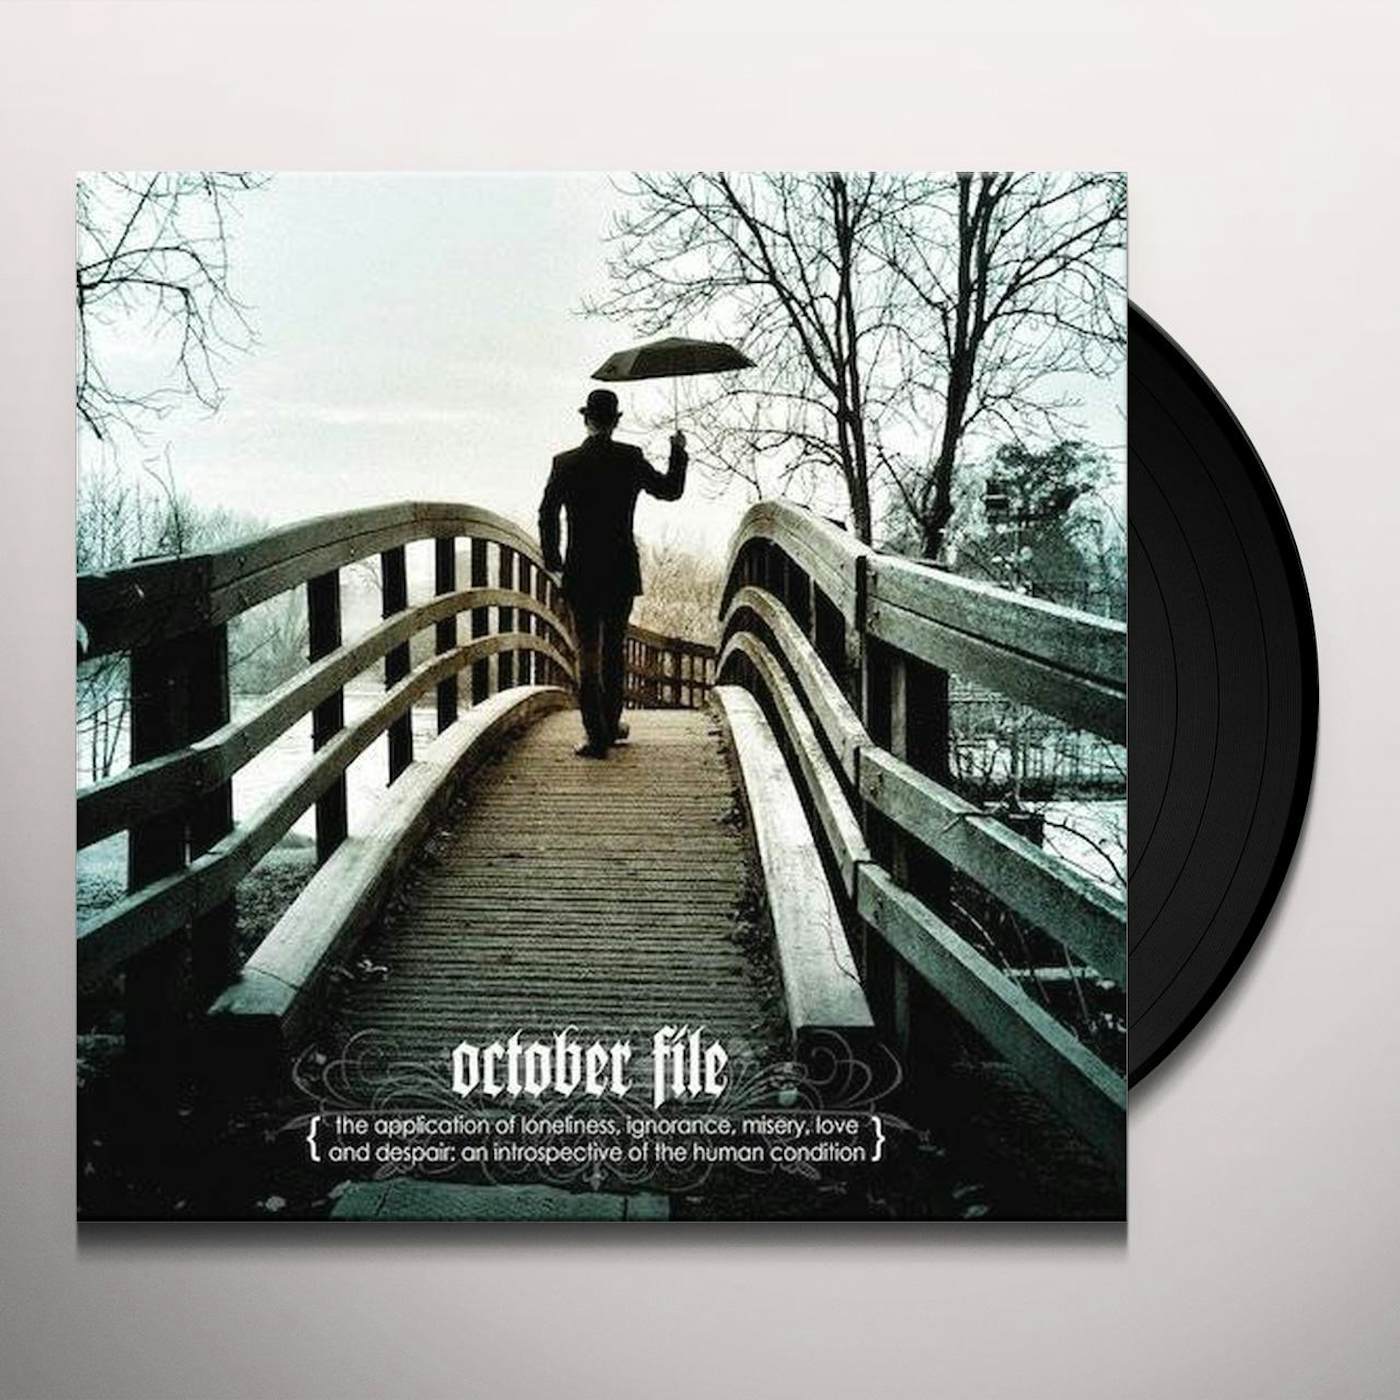 October File APPLICATION OF LONELINESS IGNORANCE MISERY LOVE Vinyl Record